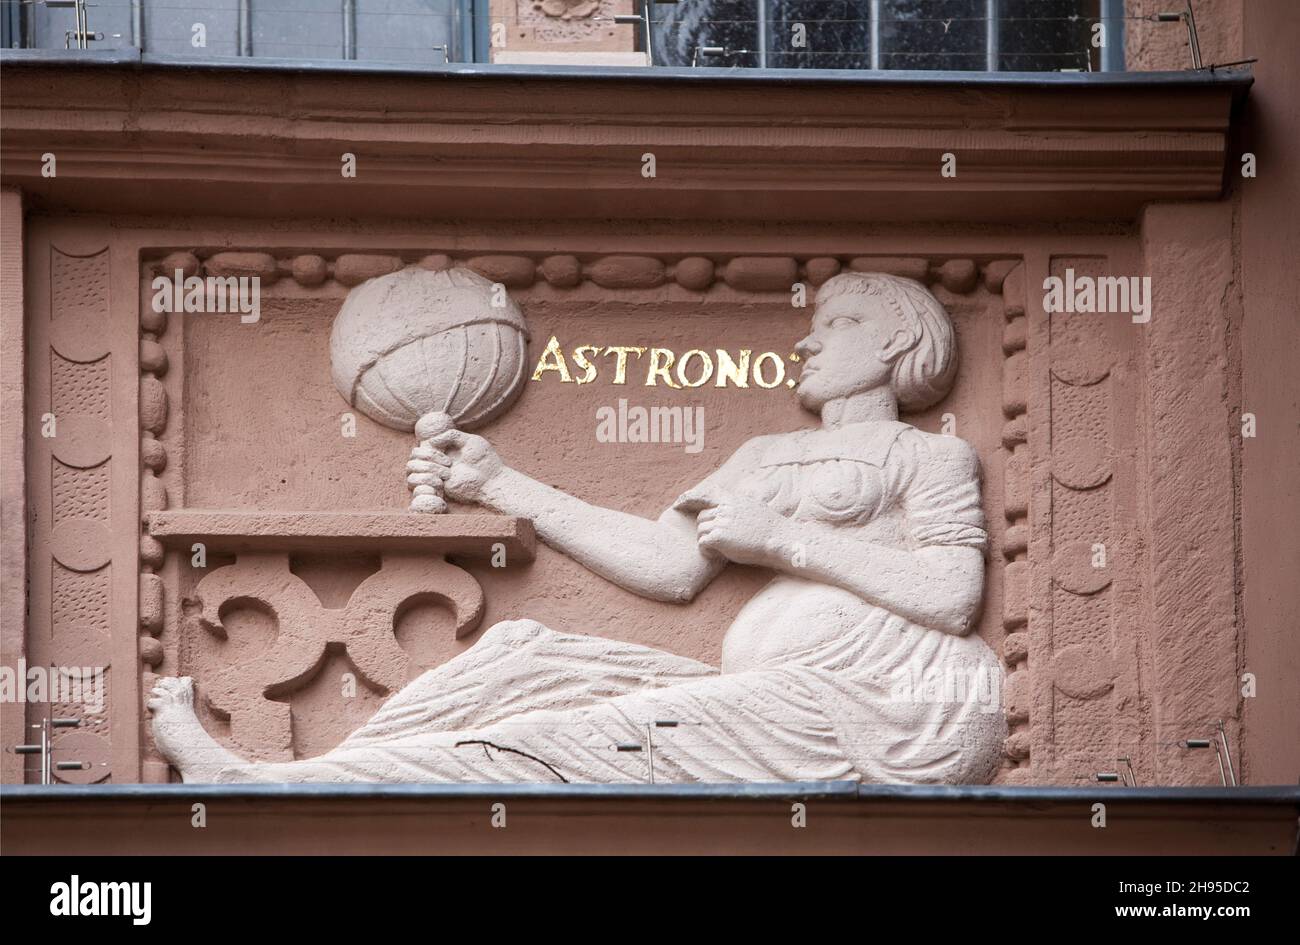 Astrono, astronomy, figure  at the Town Hall of Lemgo, North Rhine-Westphalia, Germany, Europe Stock Photo